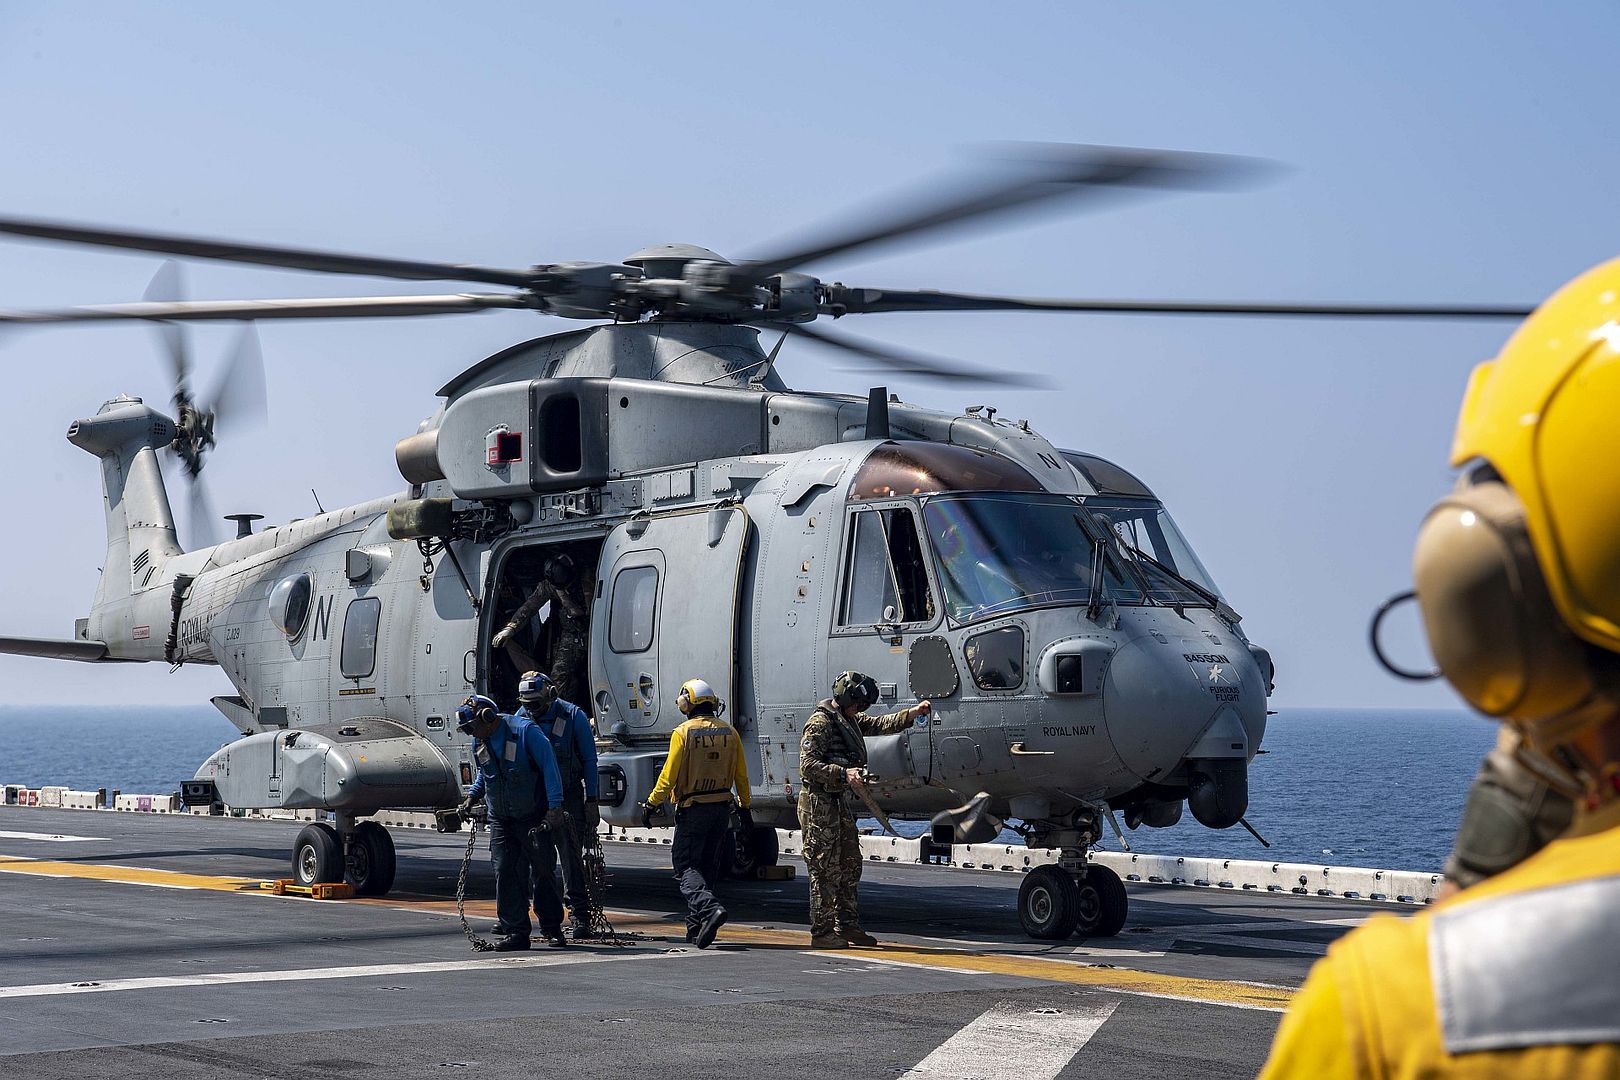 Merlin Mk4 Attached To 845 Naval Air Squadron Deployed With The Royal Navy Aircraft Carrier HMS Queen Elizabeth On The Flight Deck Of The Amphibious Assault Ship USS Essex